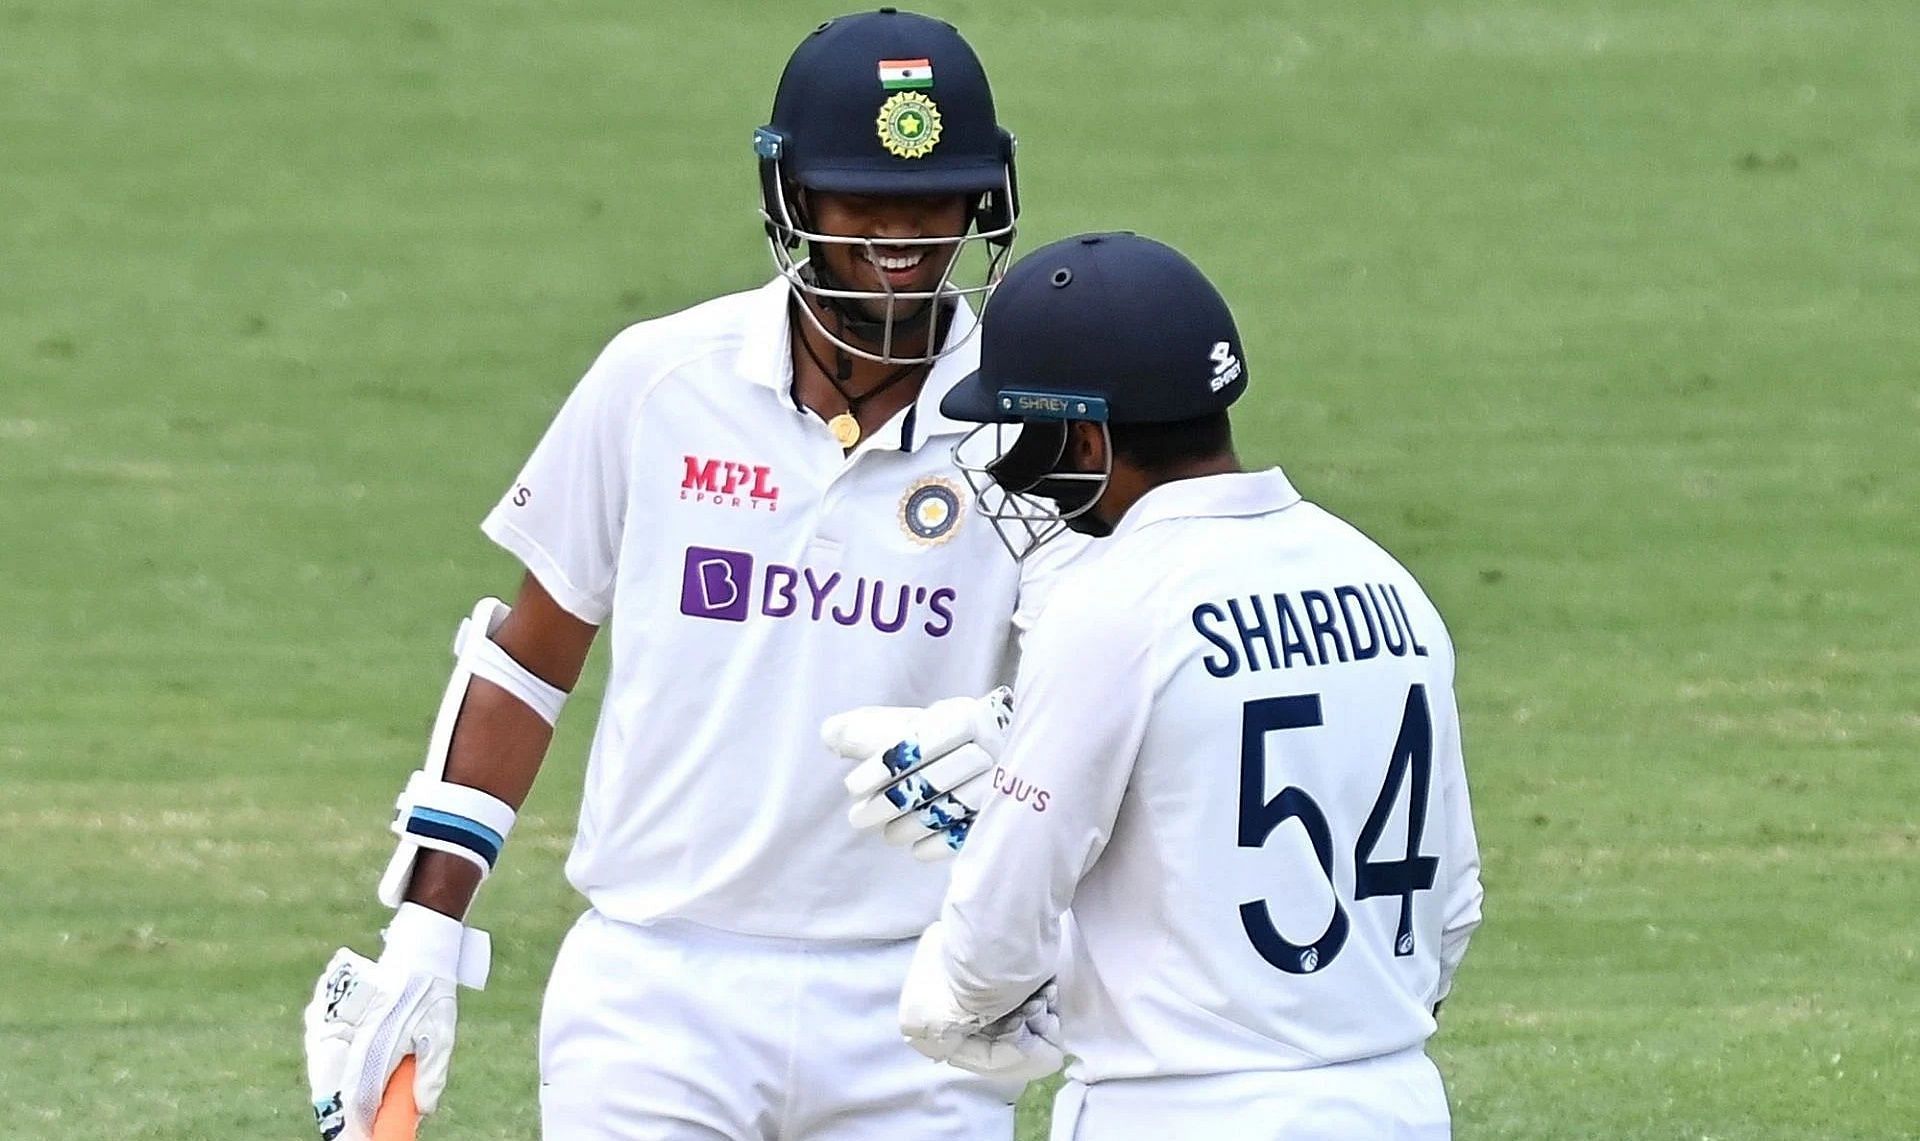 Washington Sundar and Shardul Thakur featured in a game-defining stand. Pic: Getty Images